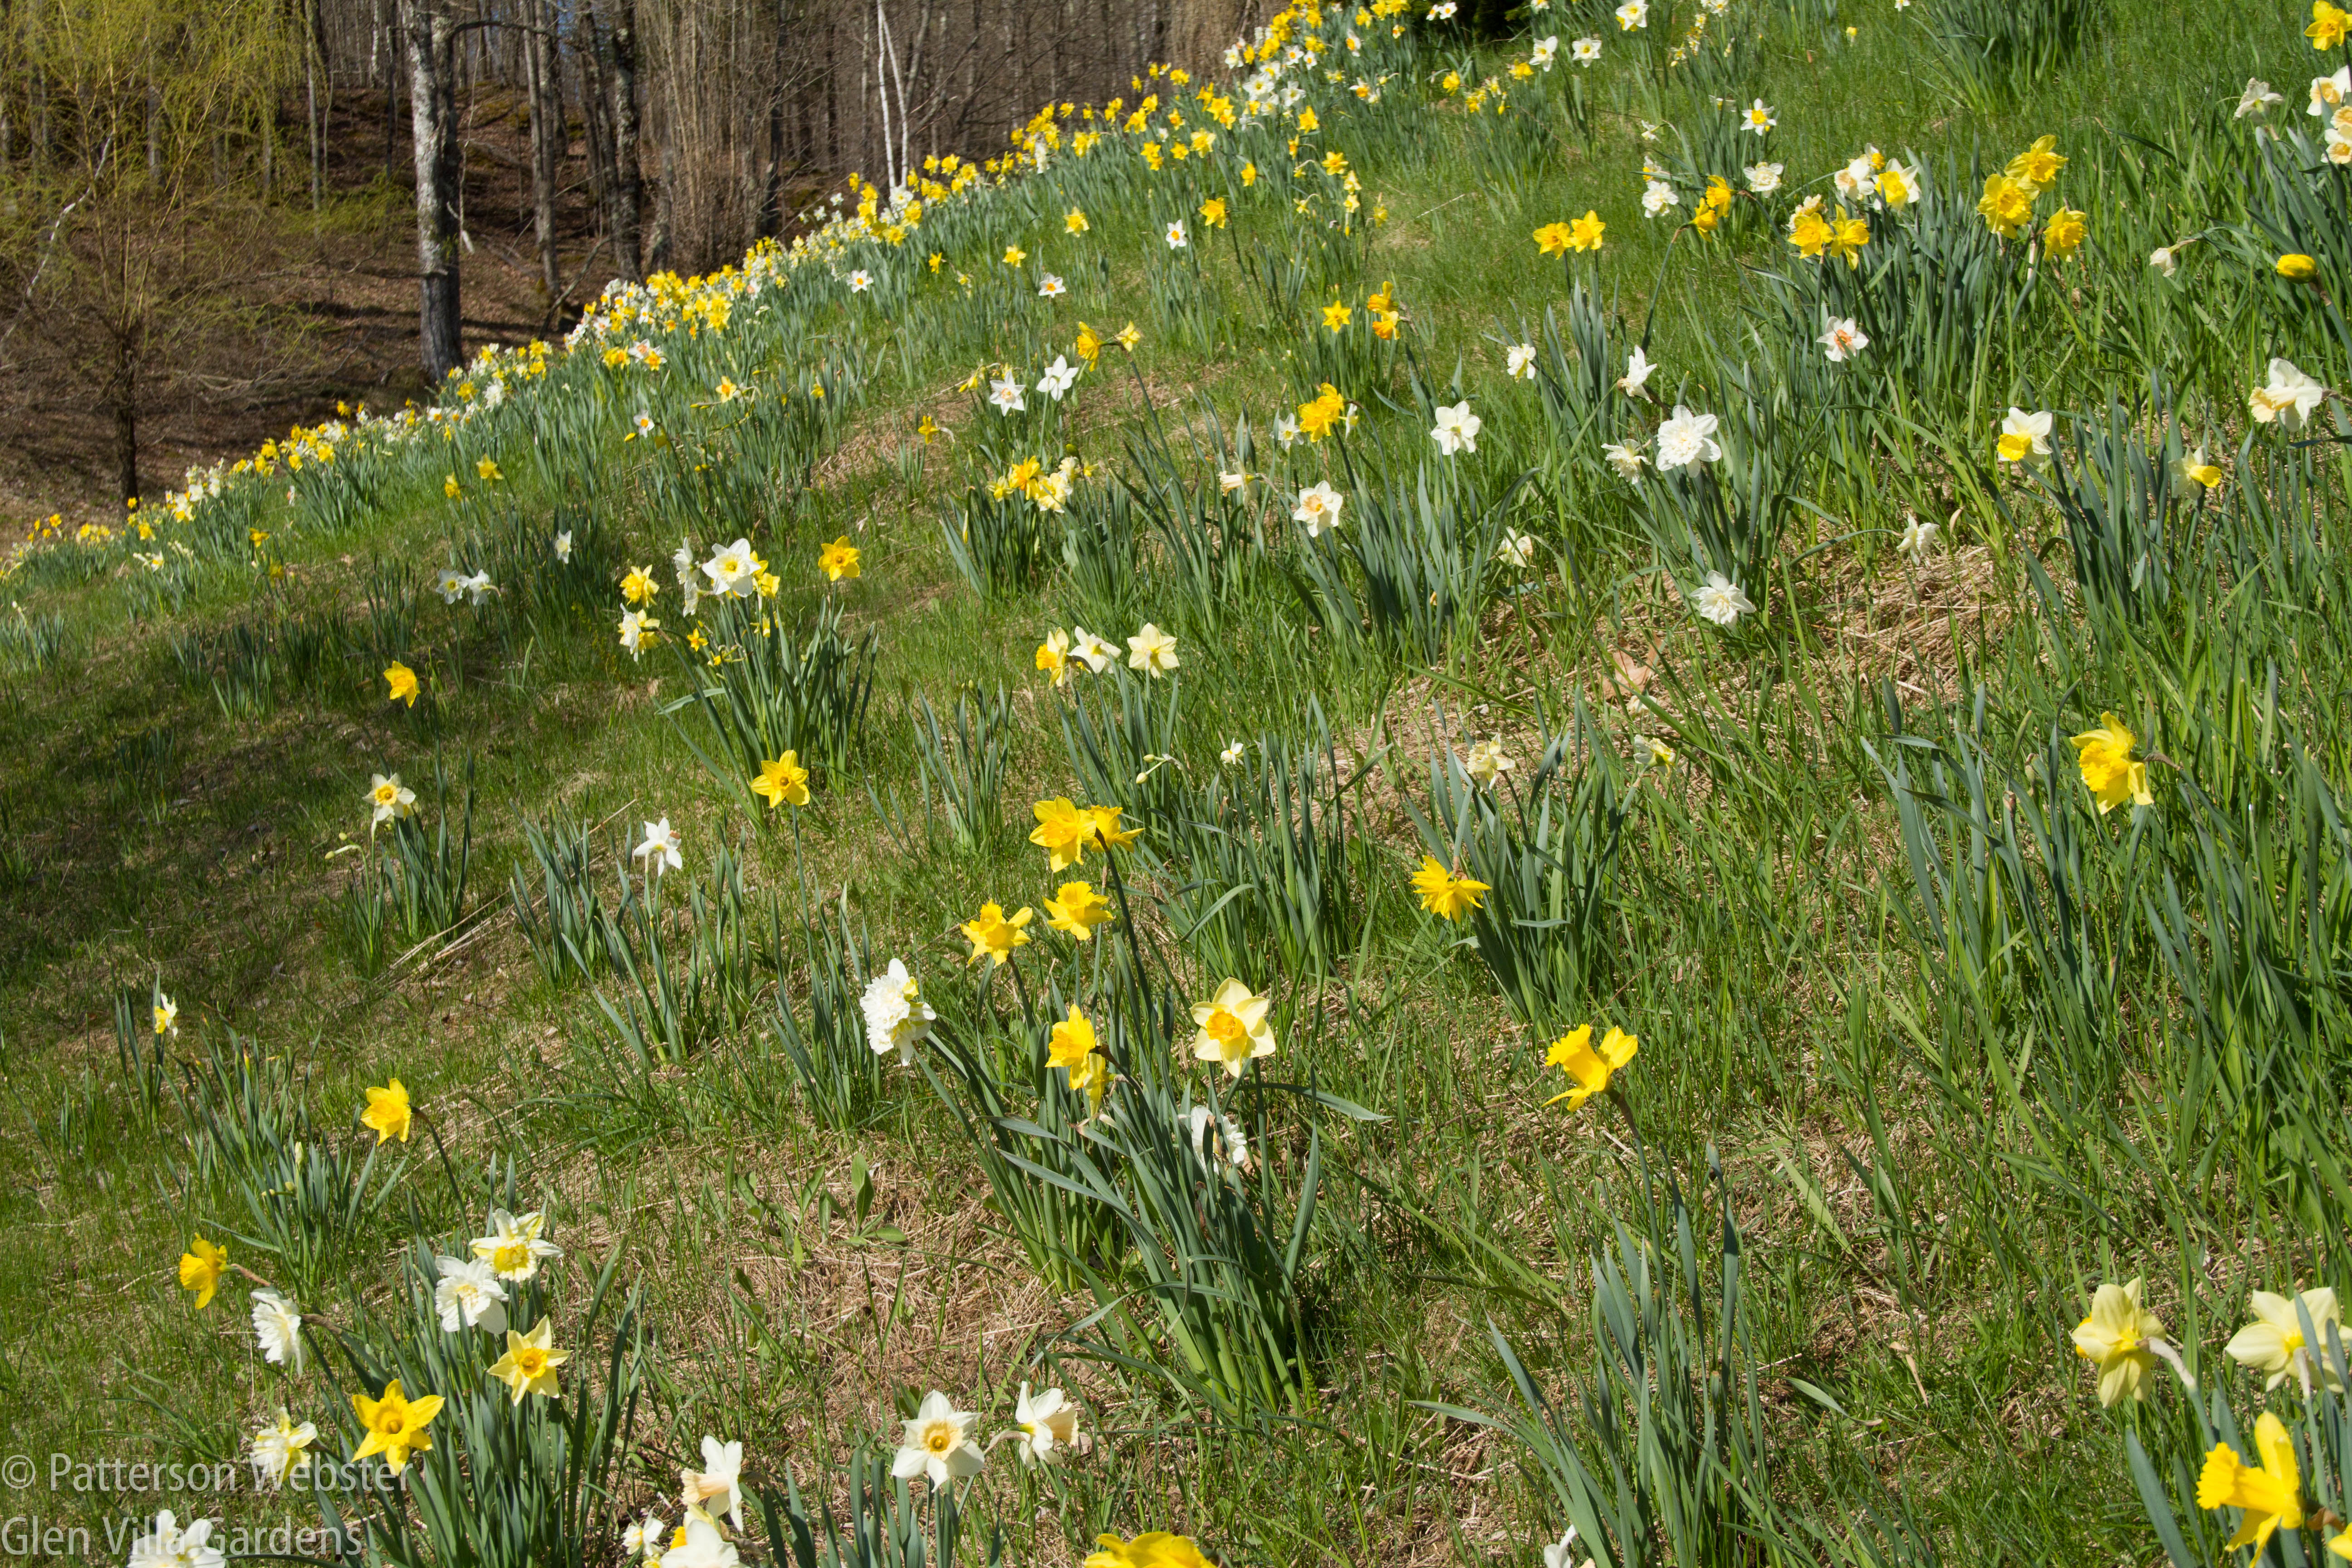 More daffodils crowd the hill above the Skating Pond.